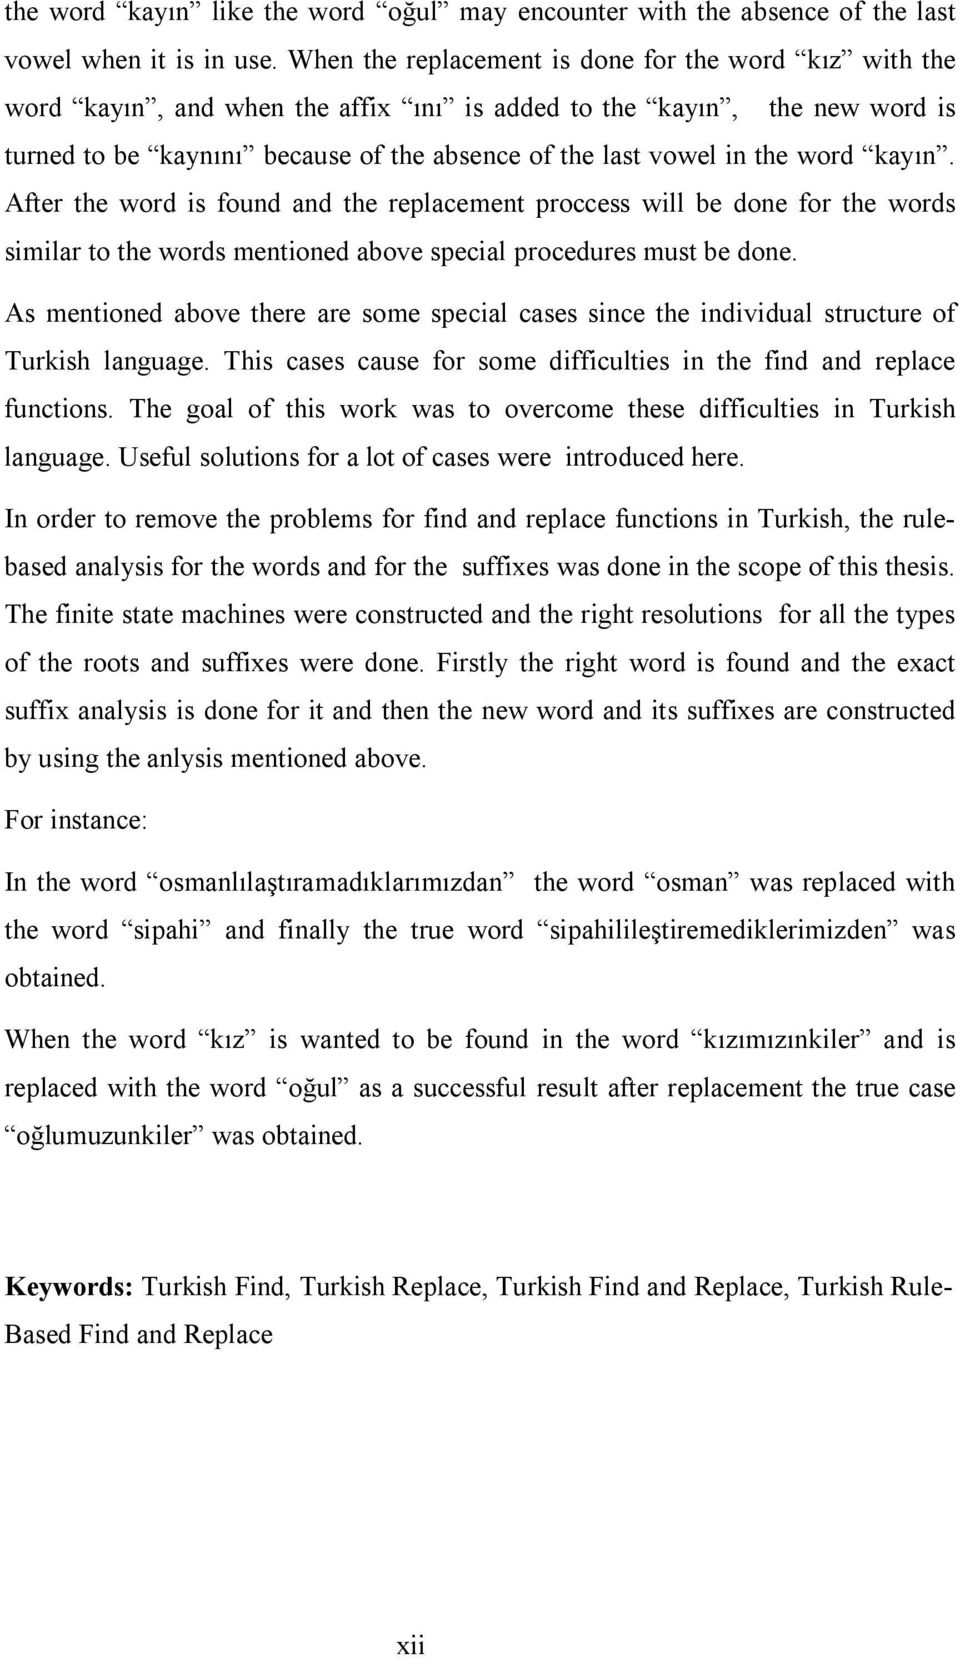 word kayın. After the word is found and the replacement proccess will be done for the words similar to the words mentioned above special procedures must be done.